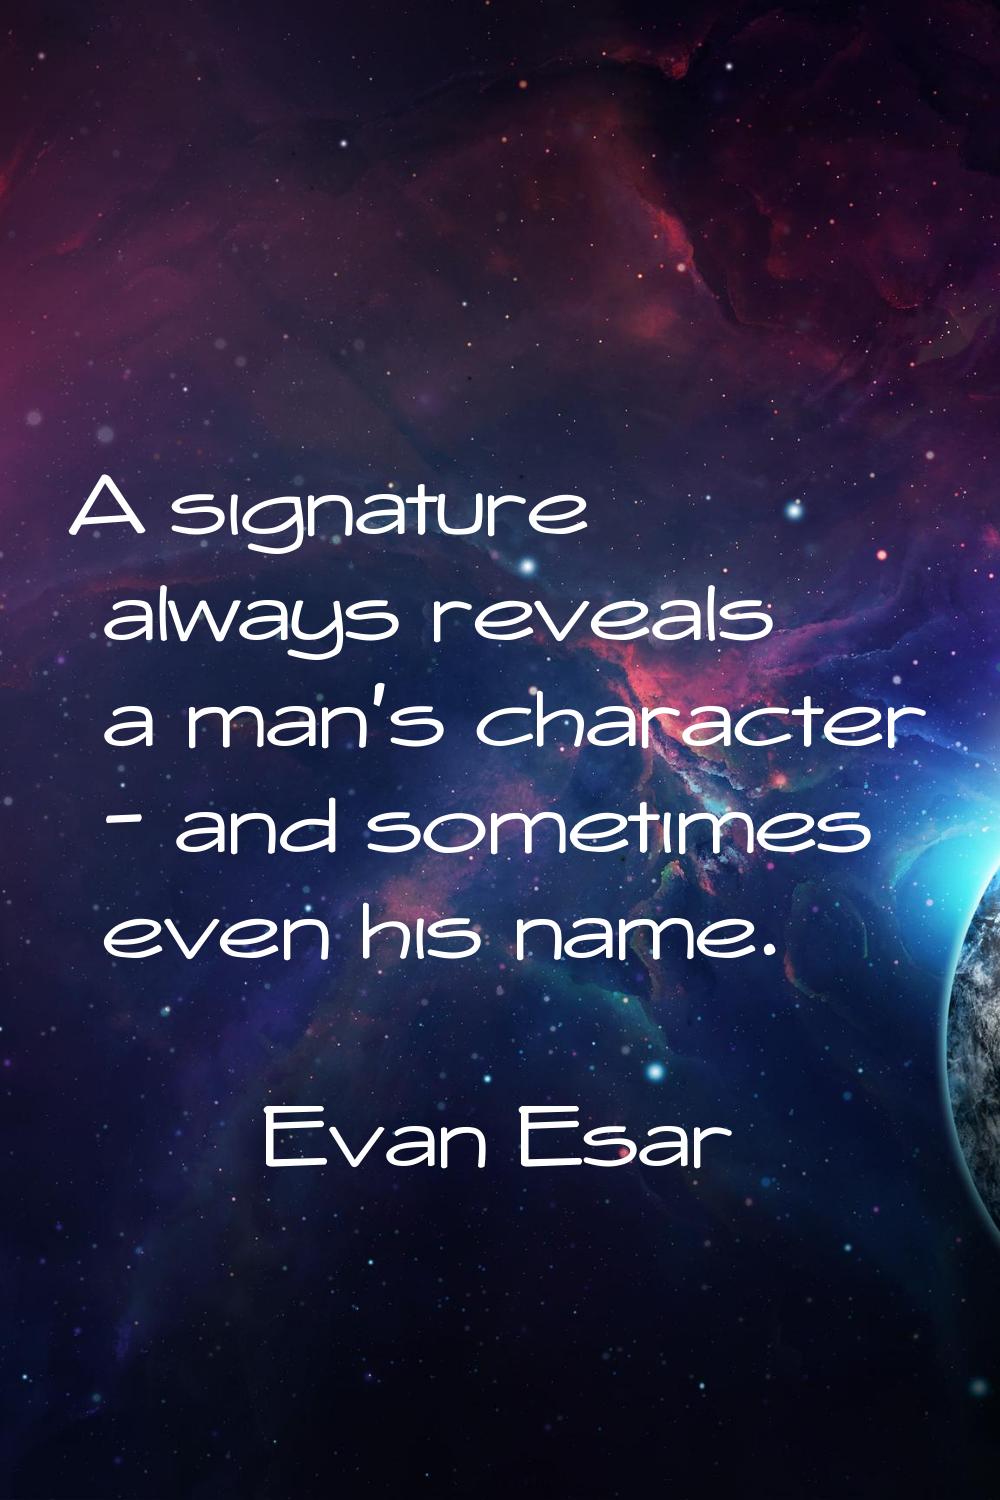 A signature always reveals a man's character - and sometimes even his name.